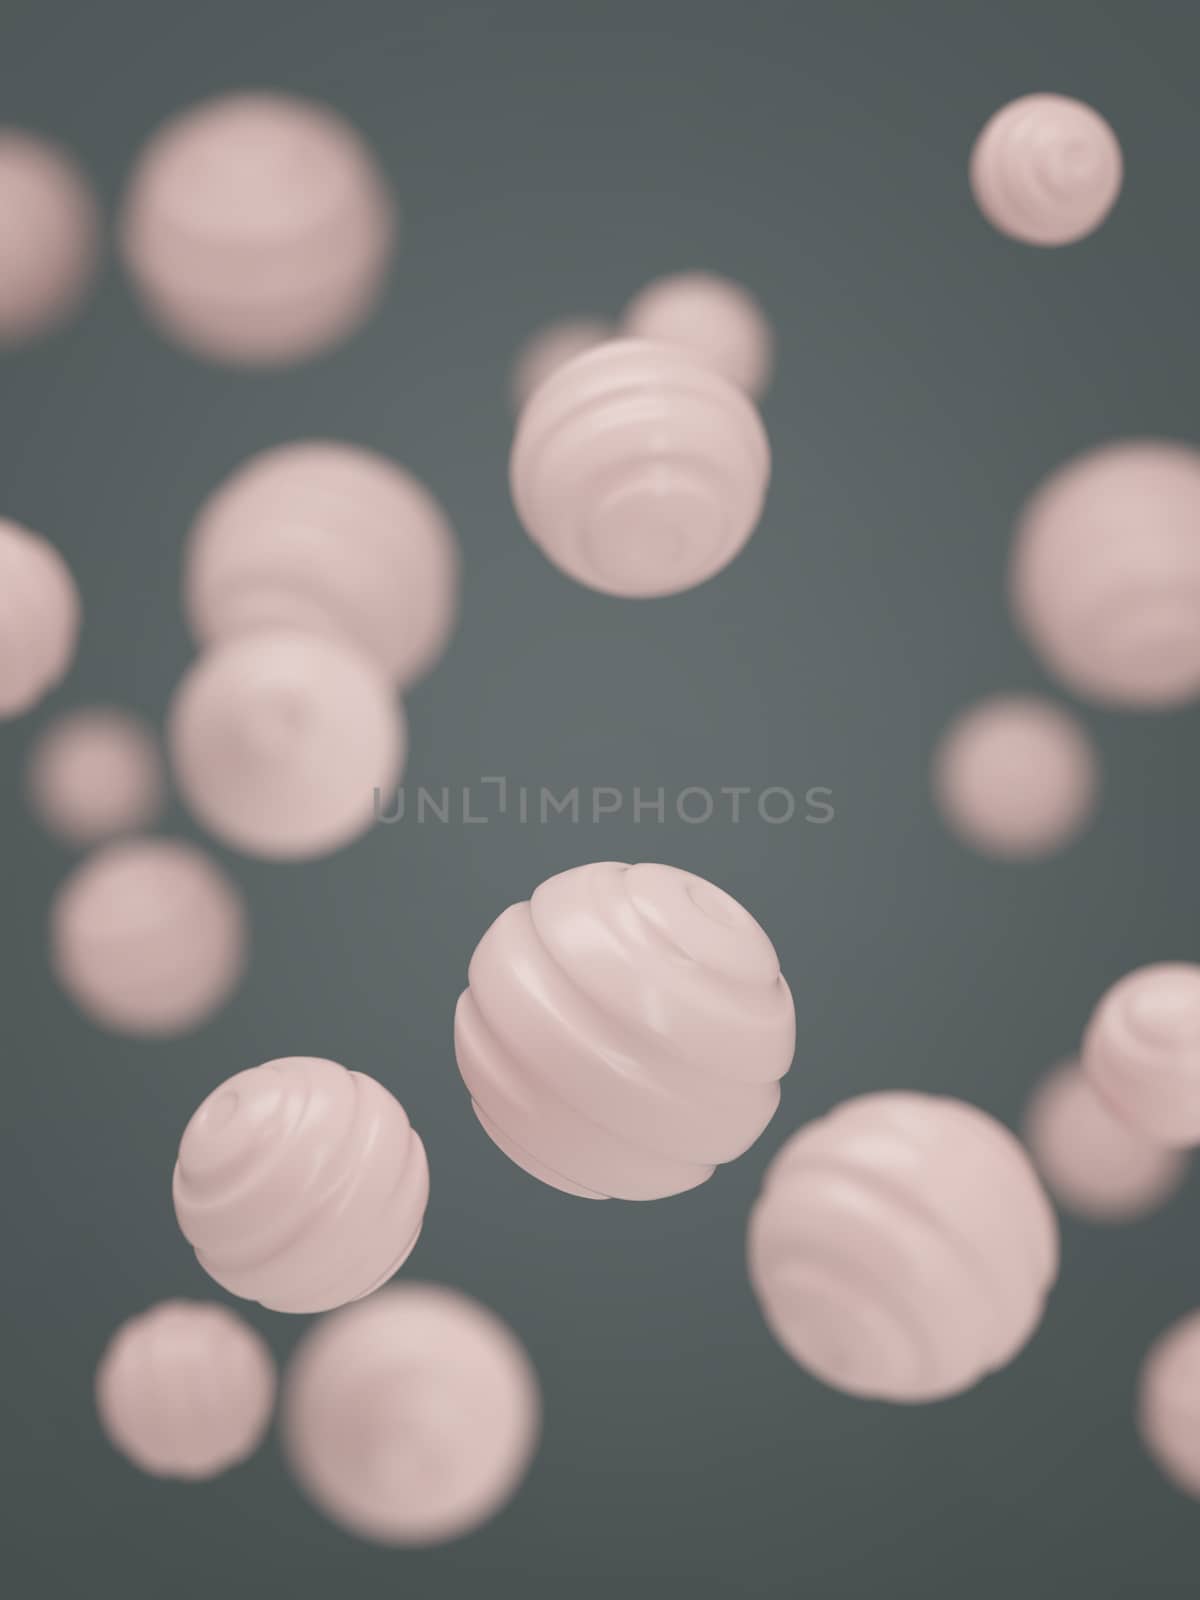 Pastel color candy background rose quartz 3d rendering by chingraph